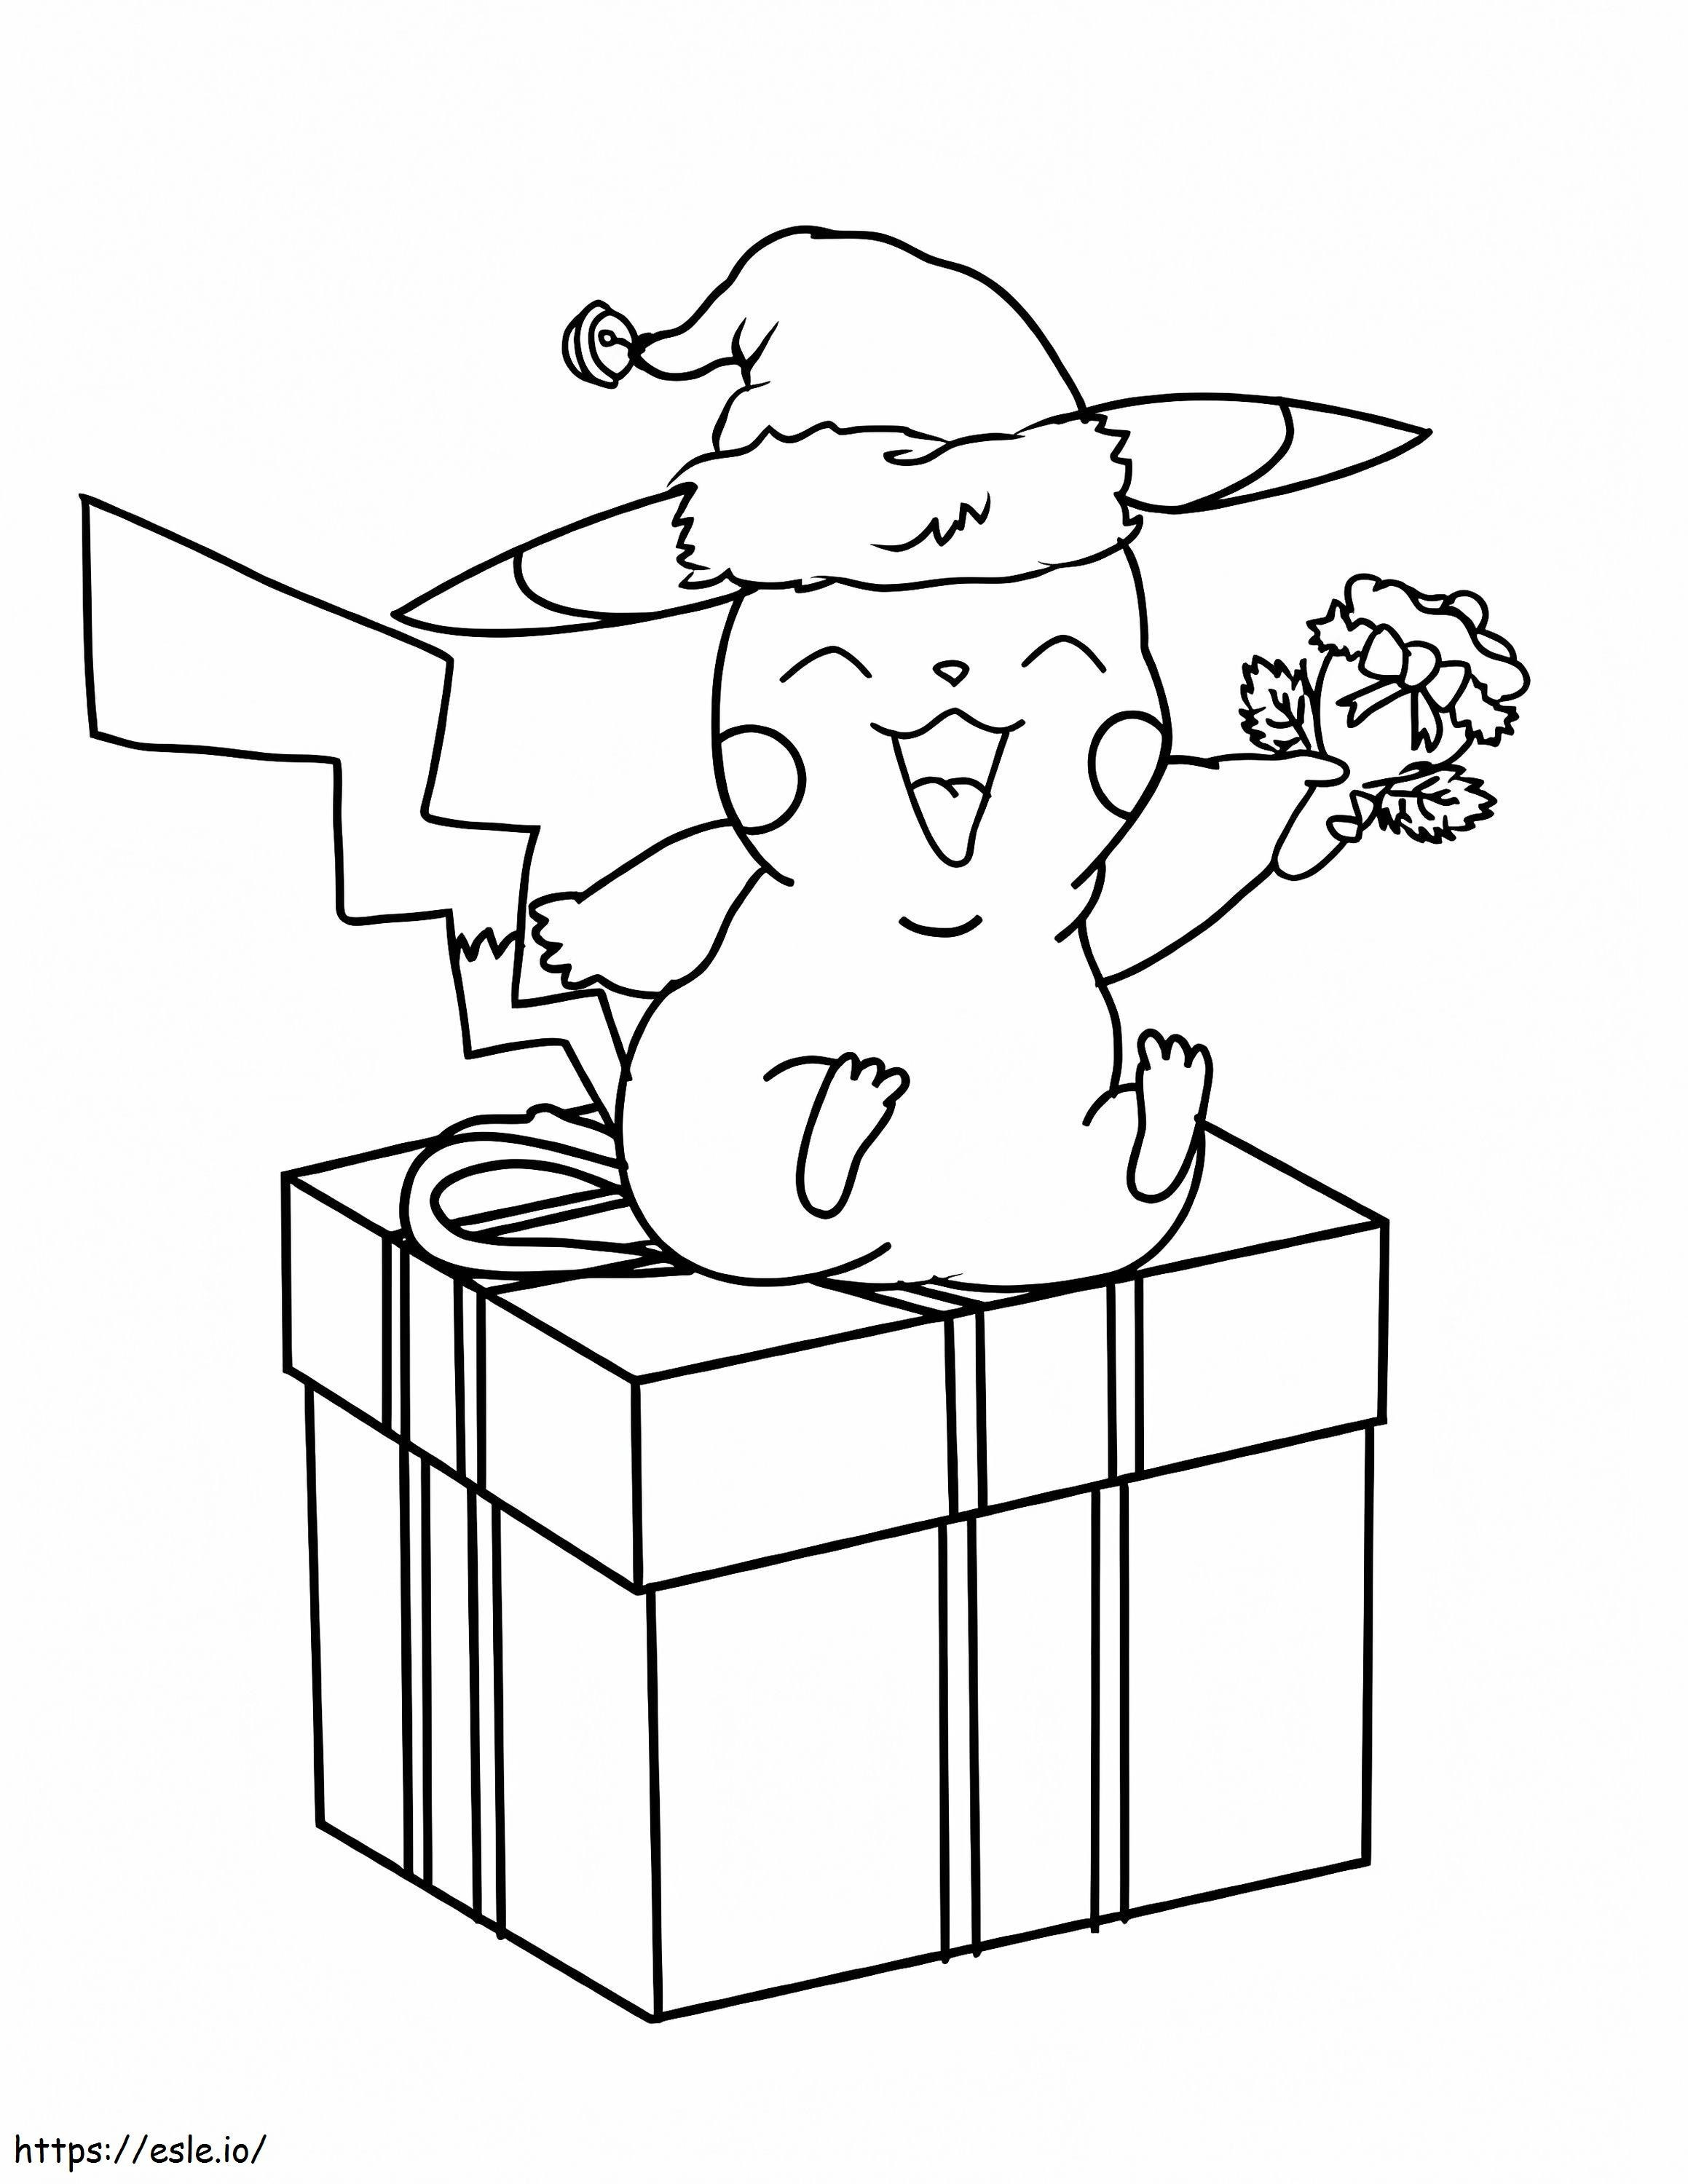 Christmas Pikachu Sitting In Gift Box coloring page